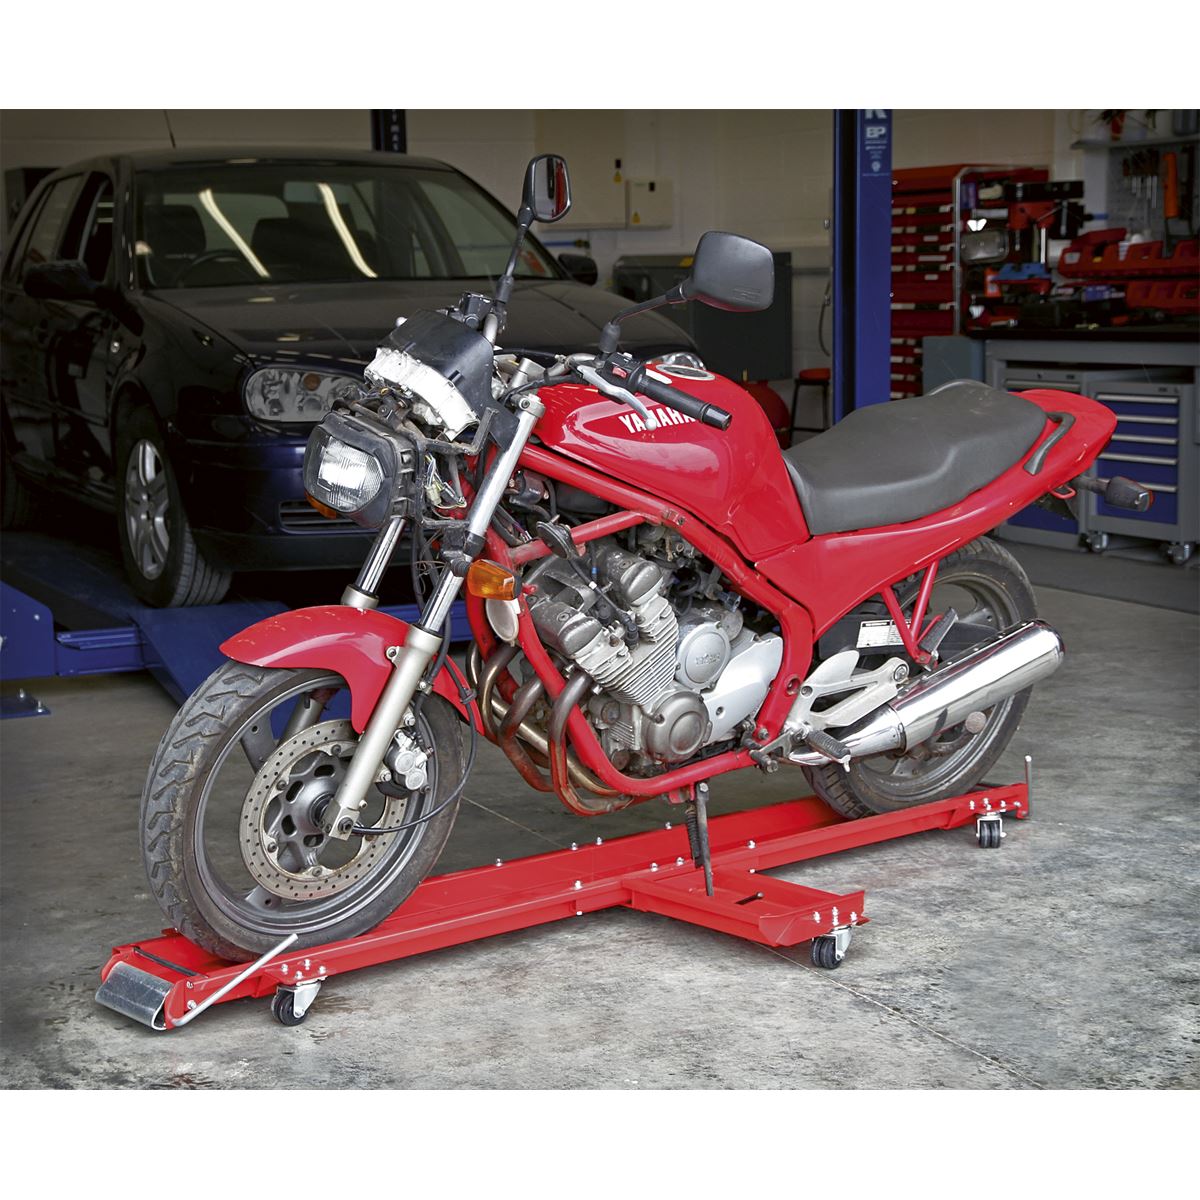 Sealey Motorcycle Side Stand Type Dolly